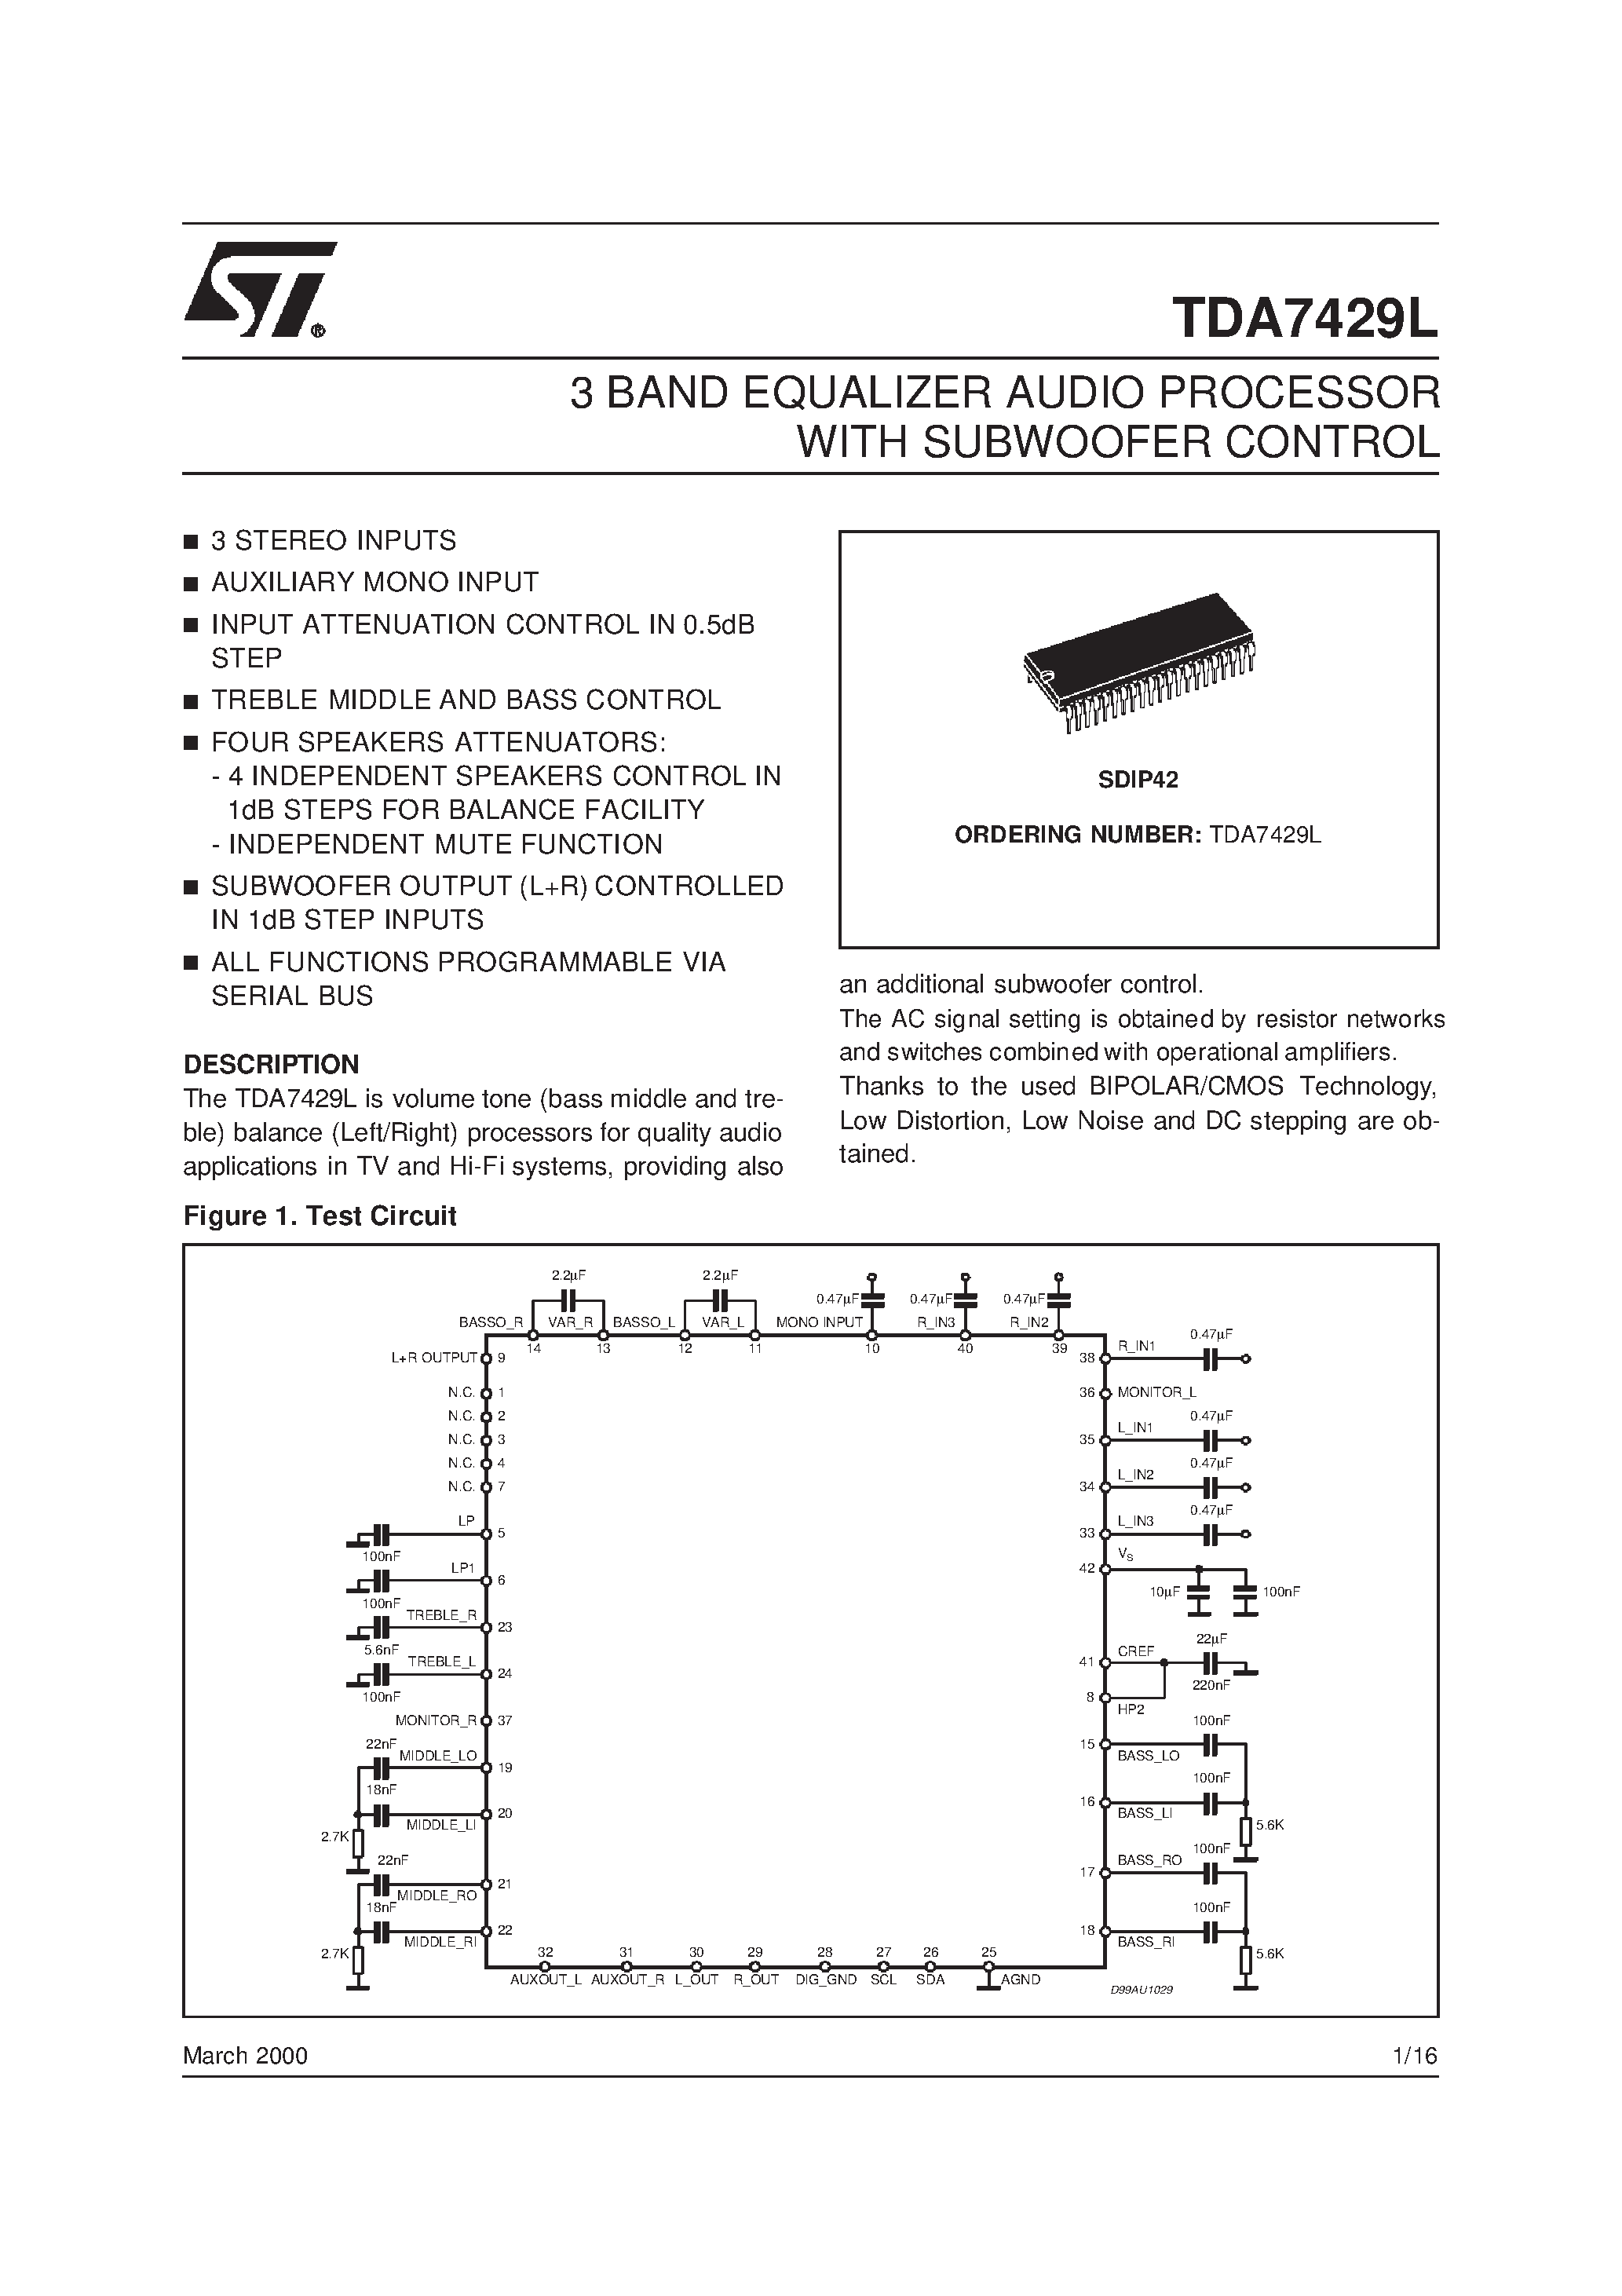 Datasheet 7429 - 3 BAND EQUALIZER AUDIO PROCESSOR WITH SUBWOOFER CONTROL page 1